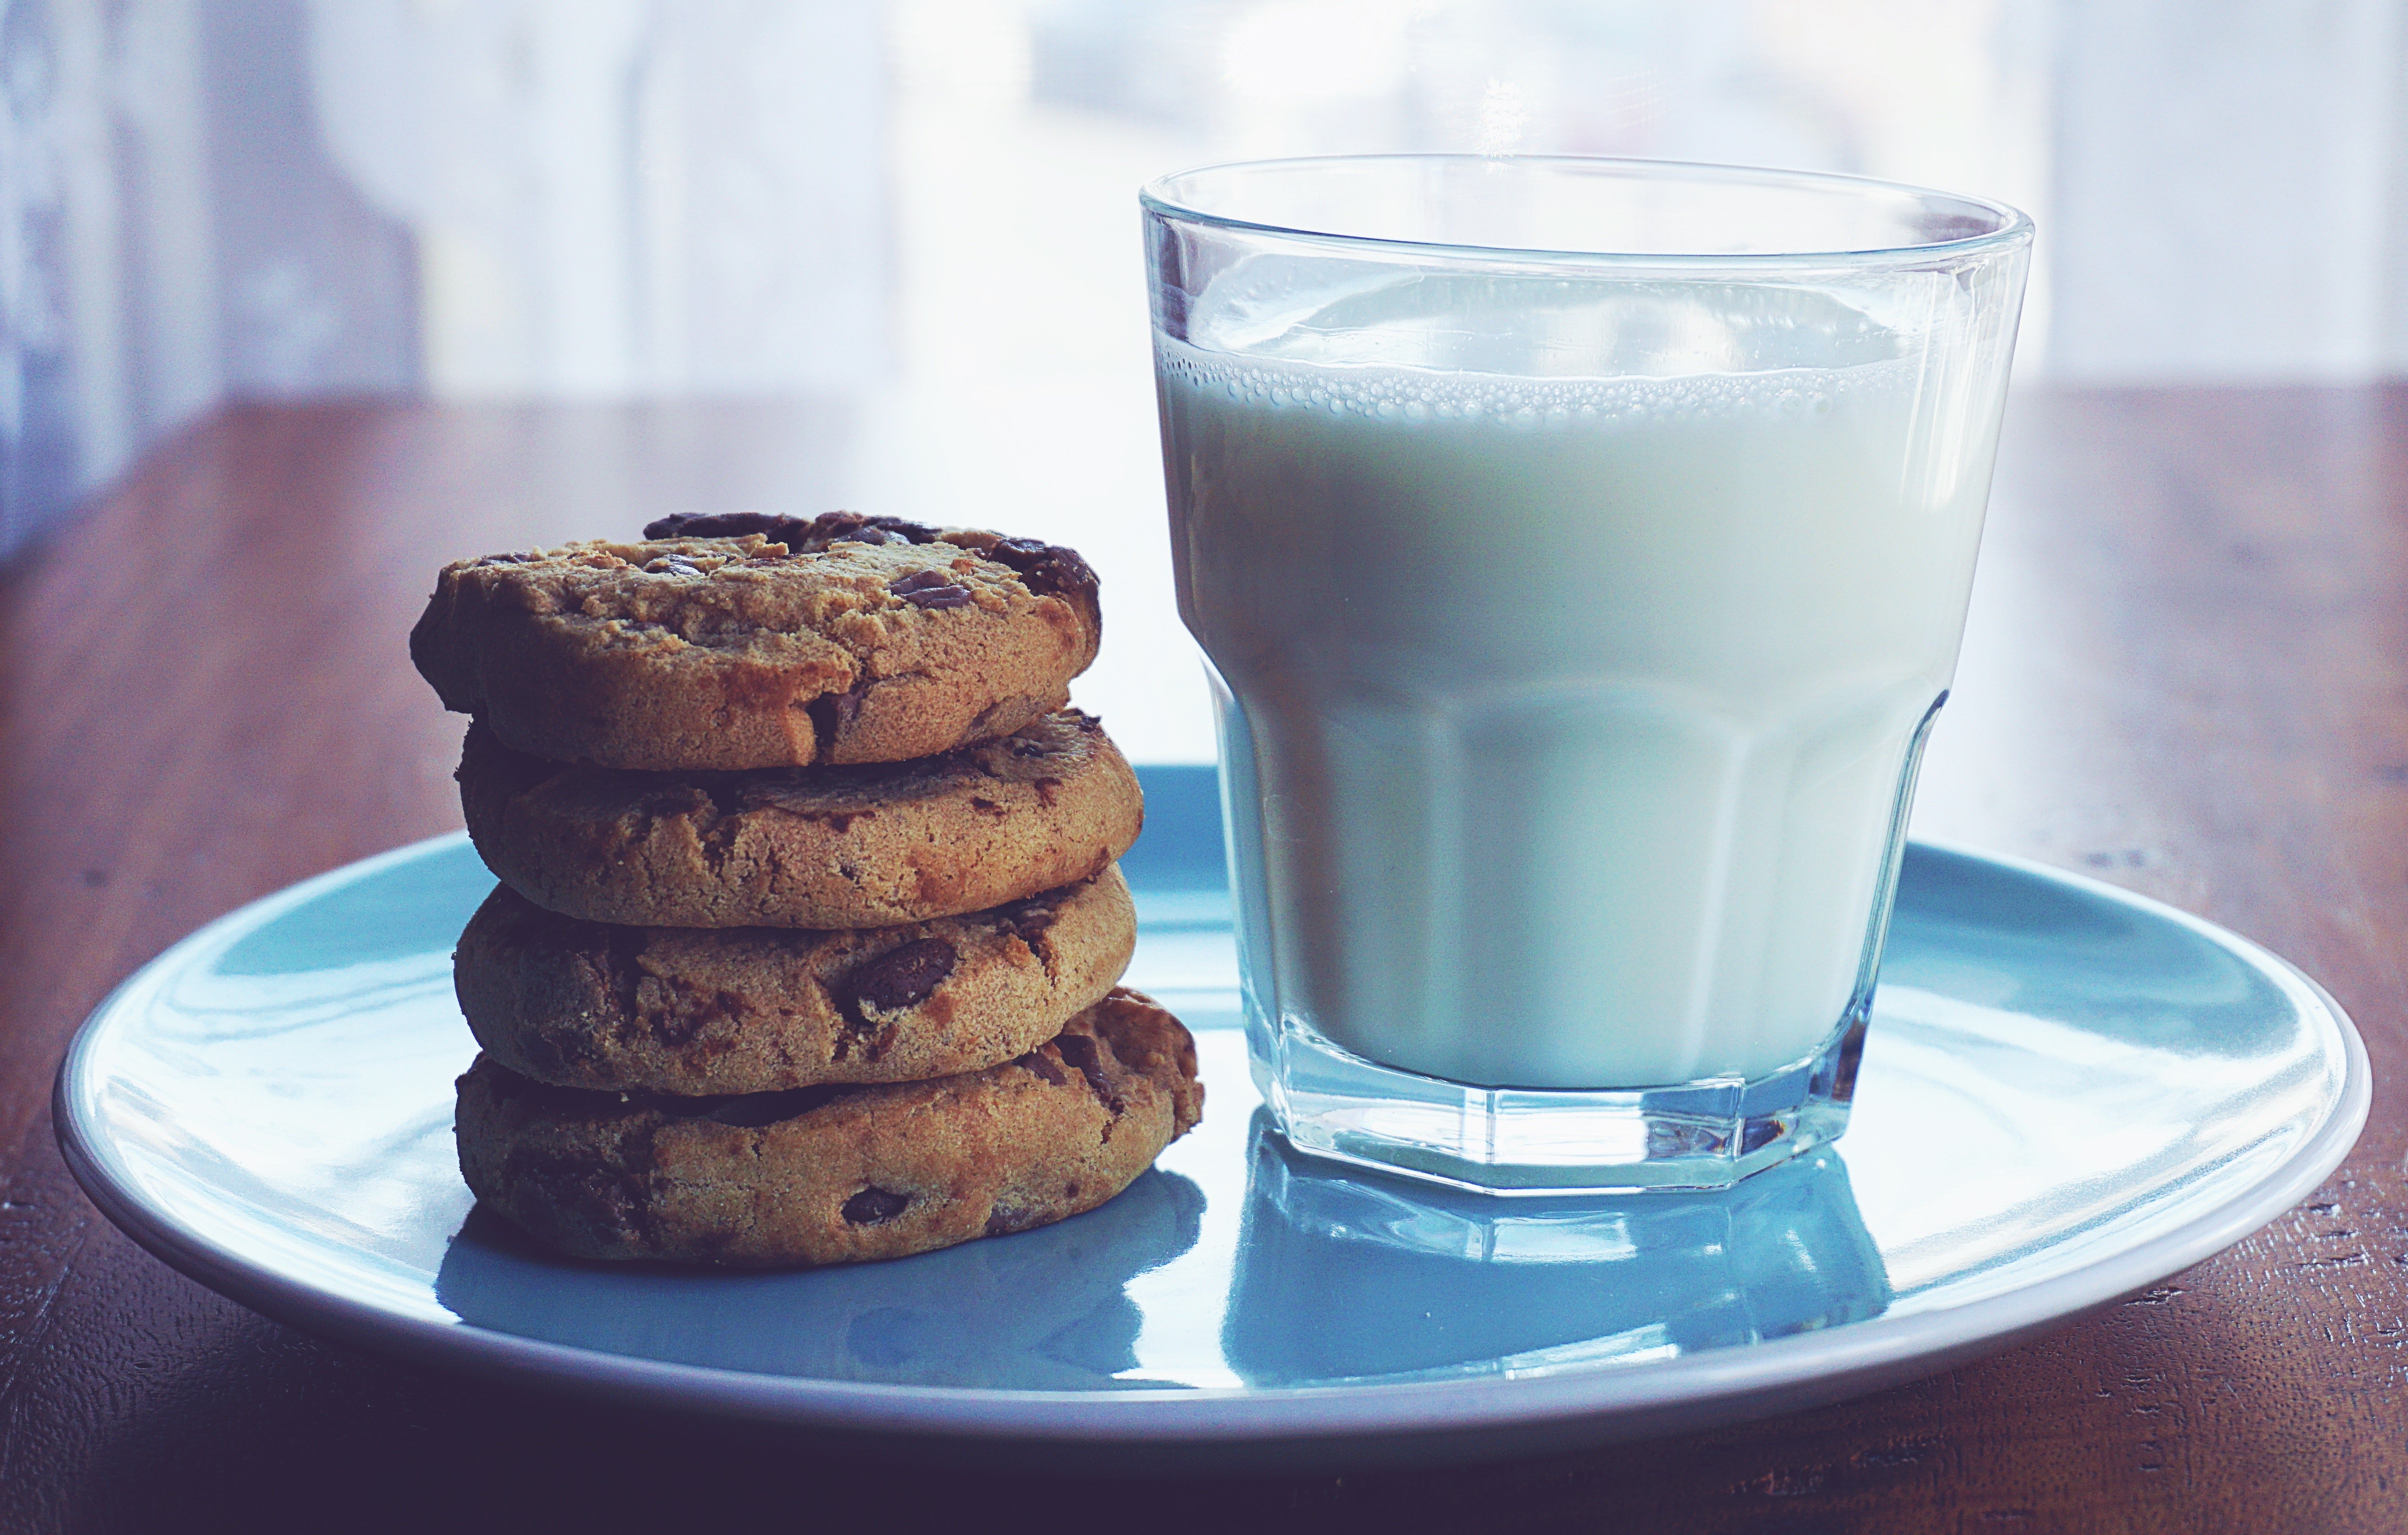 The old lady offered Abigail some milk and cookies. | Source: Pexels